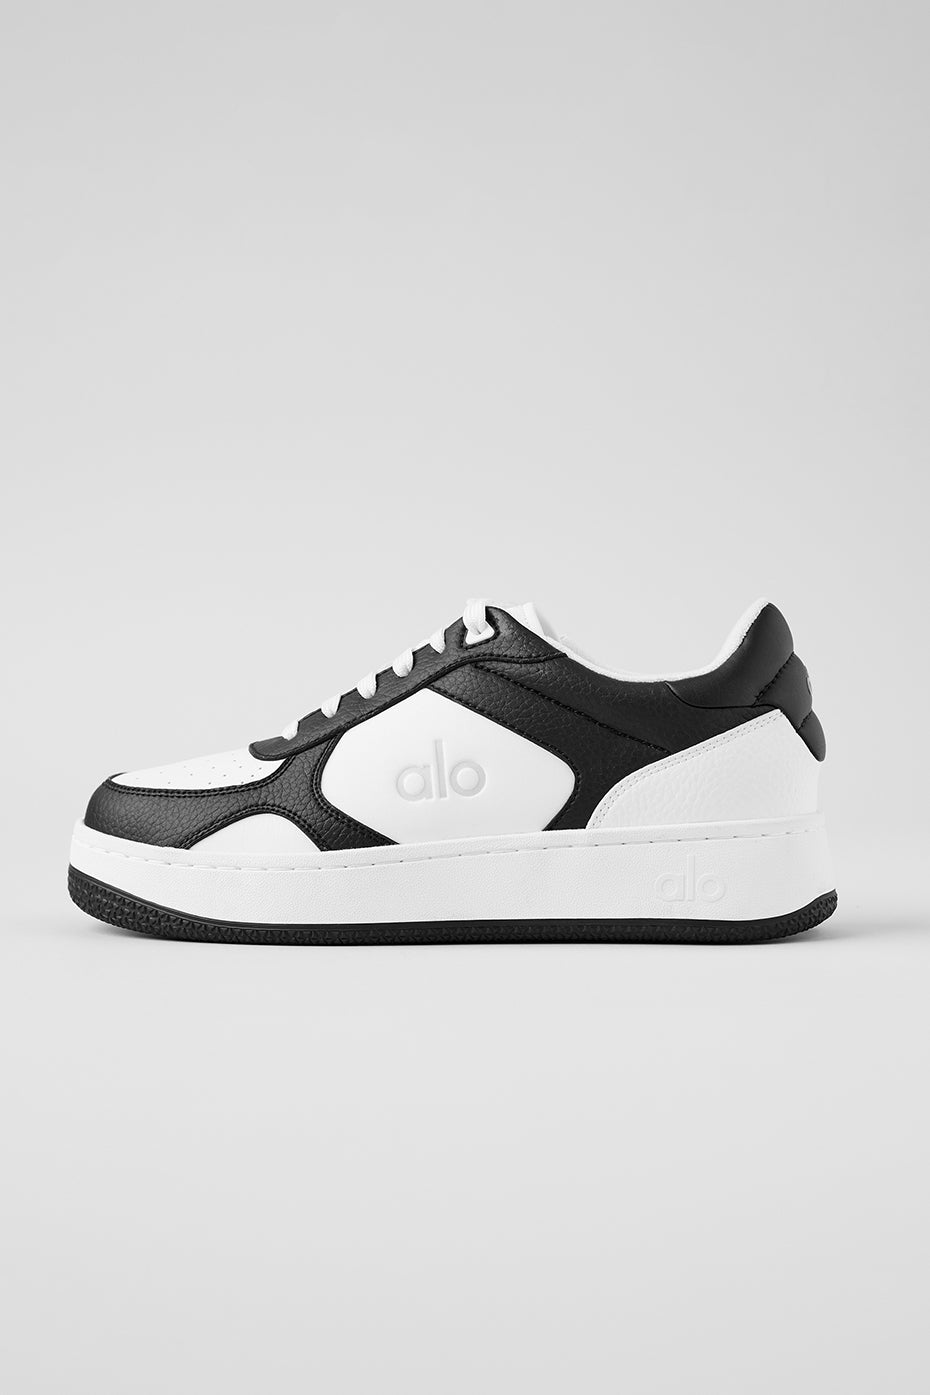 Alo x 01 Classic curated on LTK